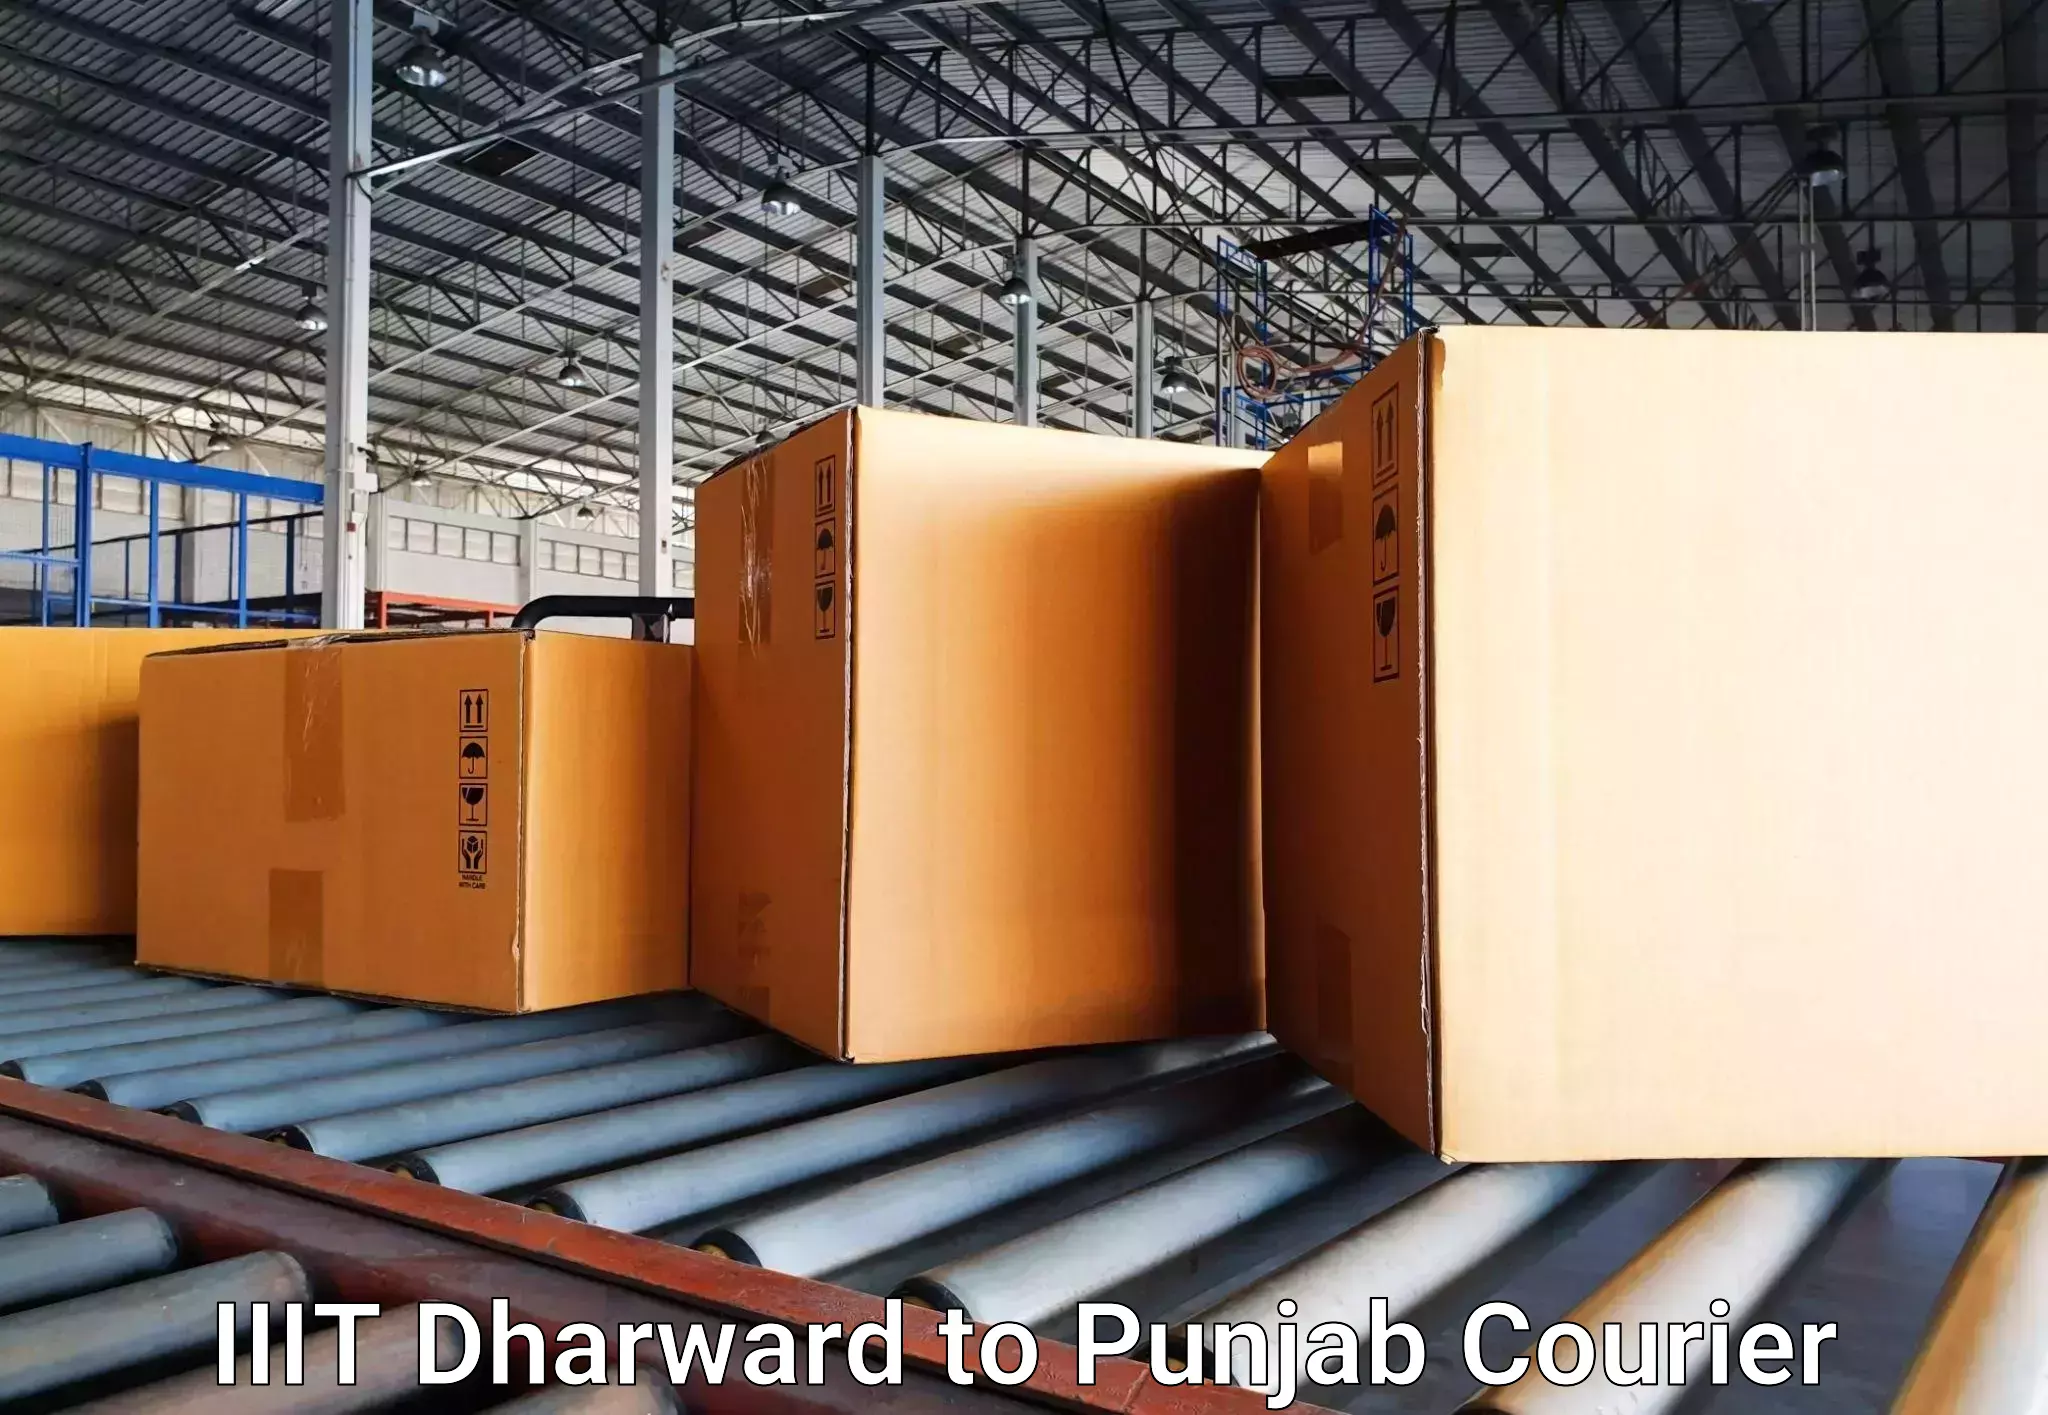 Personal effects shipping in IIIT Dharward to Punjab